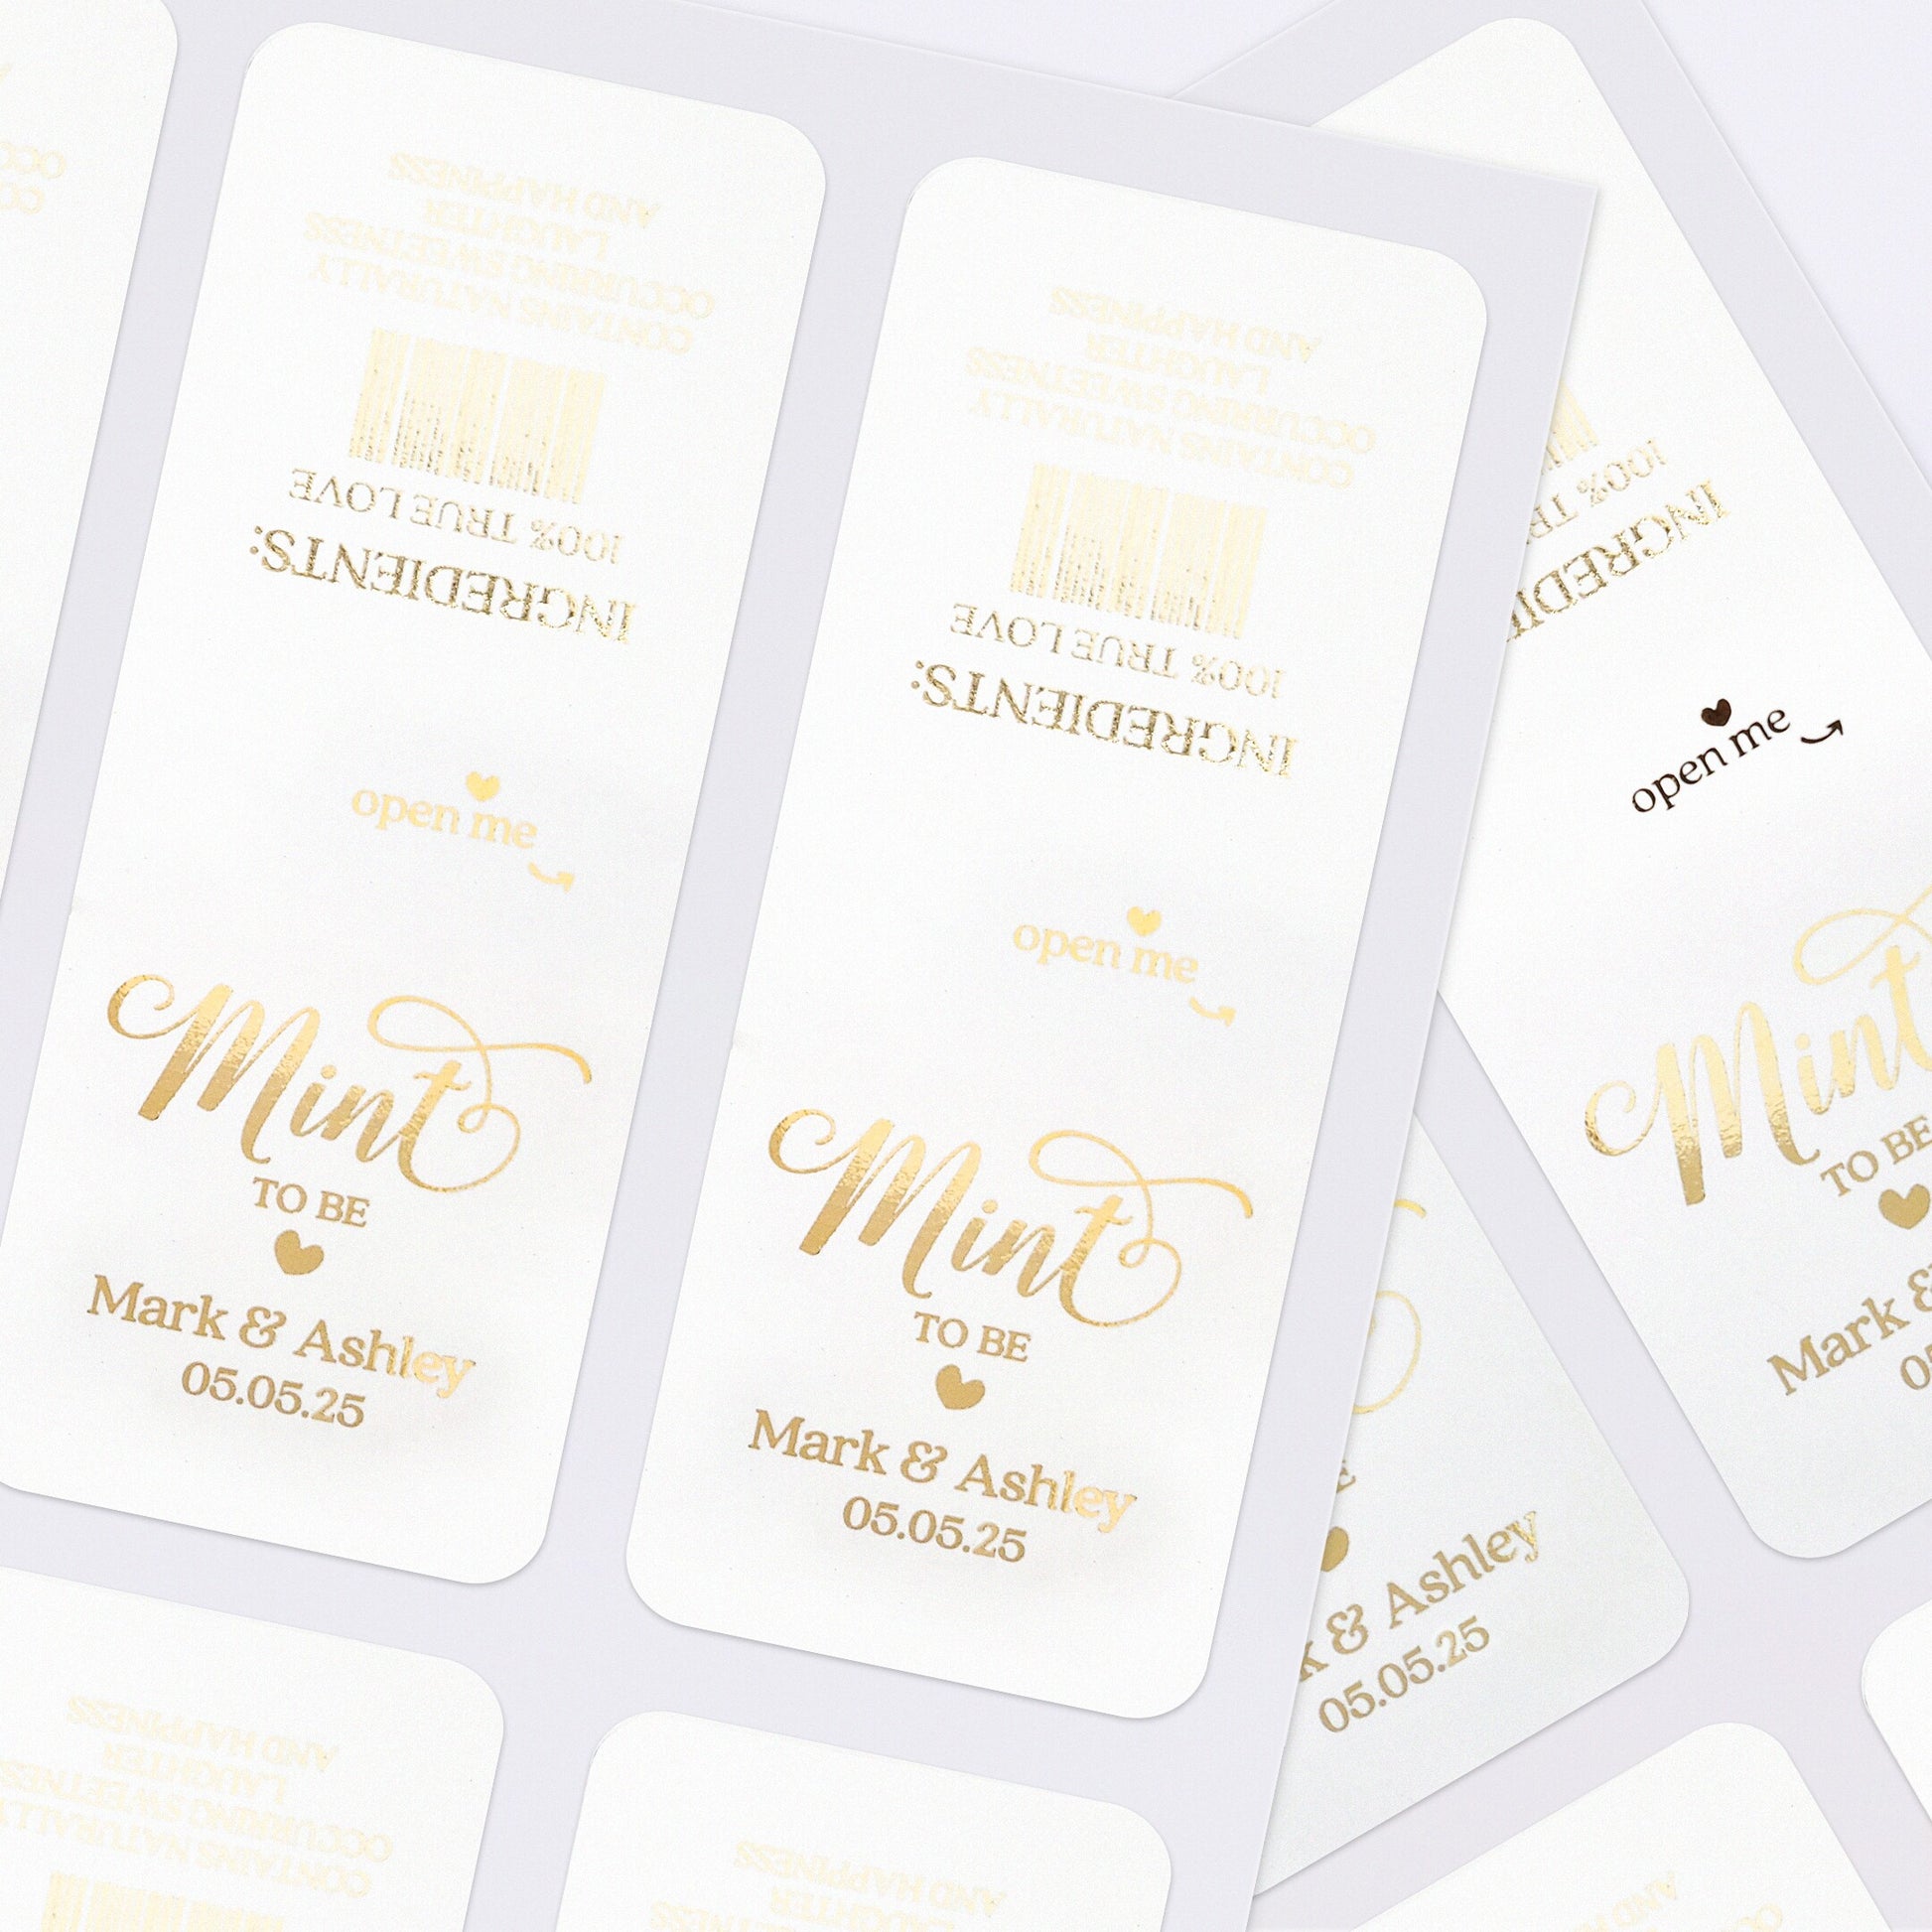 Modern calligraphy style mint to be wedding favor labels by XOXOKristen, personalized with names and wedding date, available in sparkling rose gold, gold, or silver foil, illustrating elegance and luxury for wedding favors.